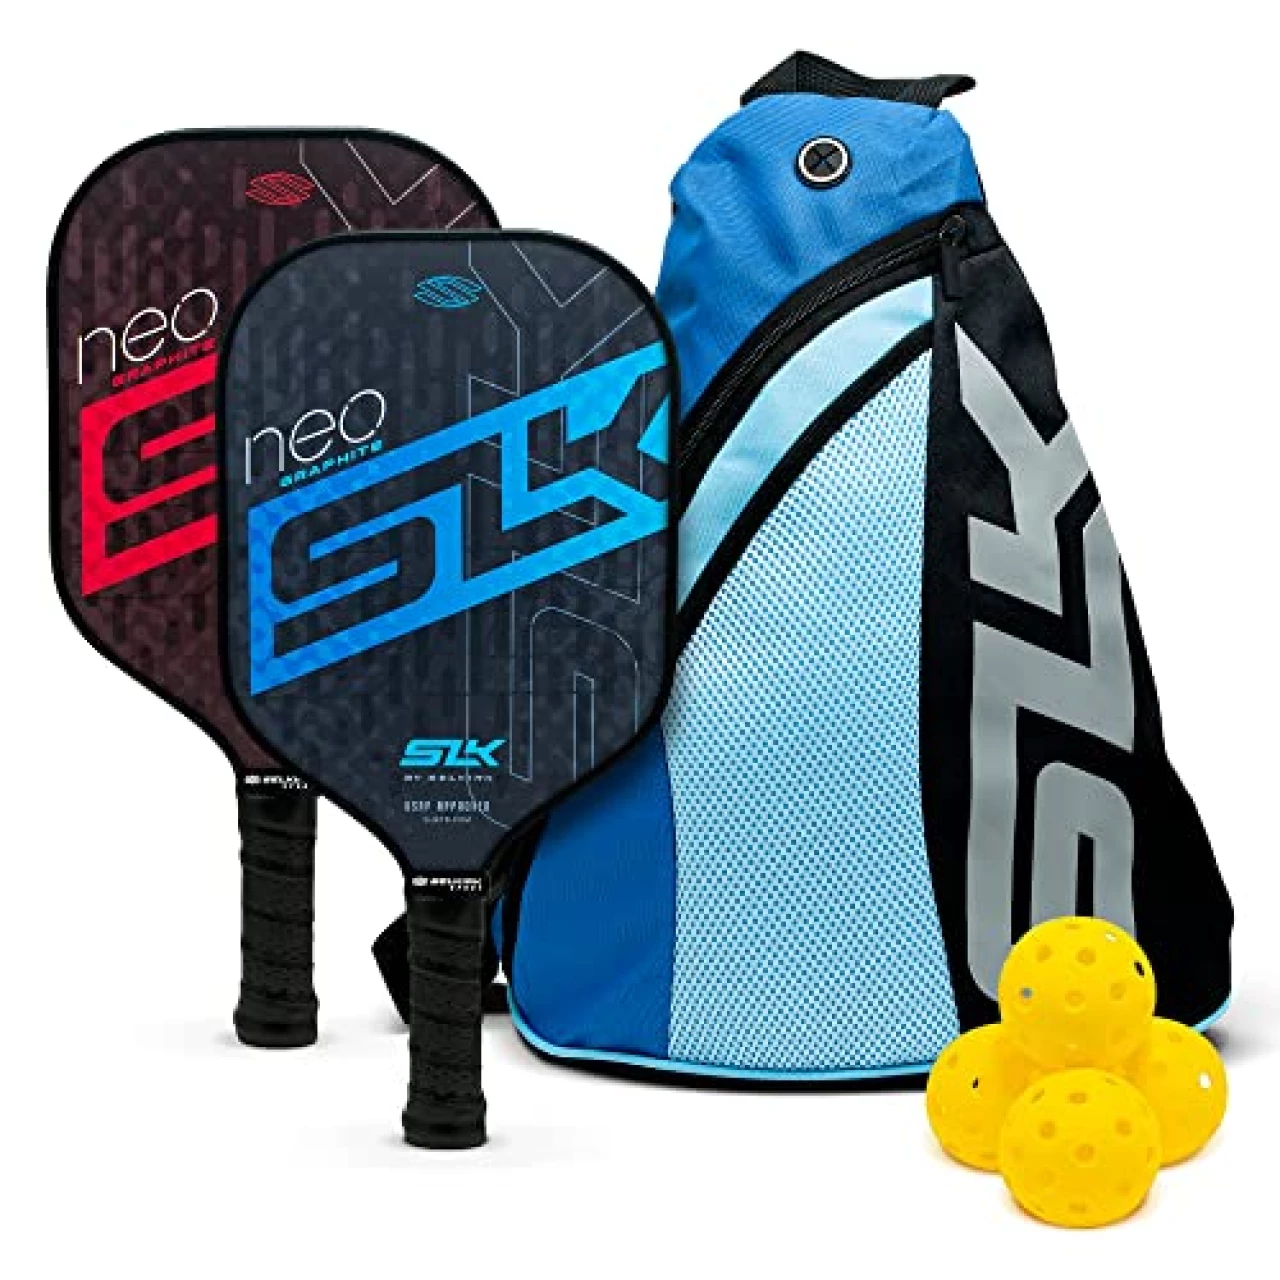 SLK by Selkirk Pickleball Paddles | Multilayer Fiberglass and Graphite Paddle Face | SX3 Honeycomb Core